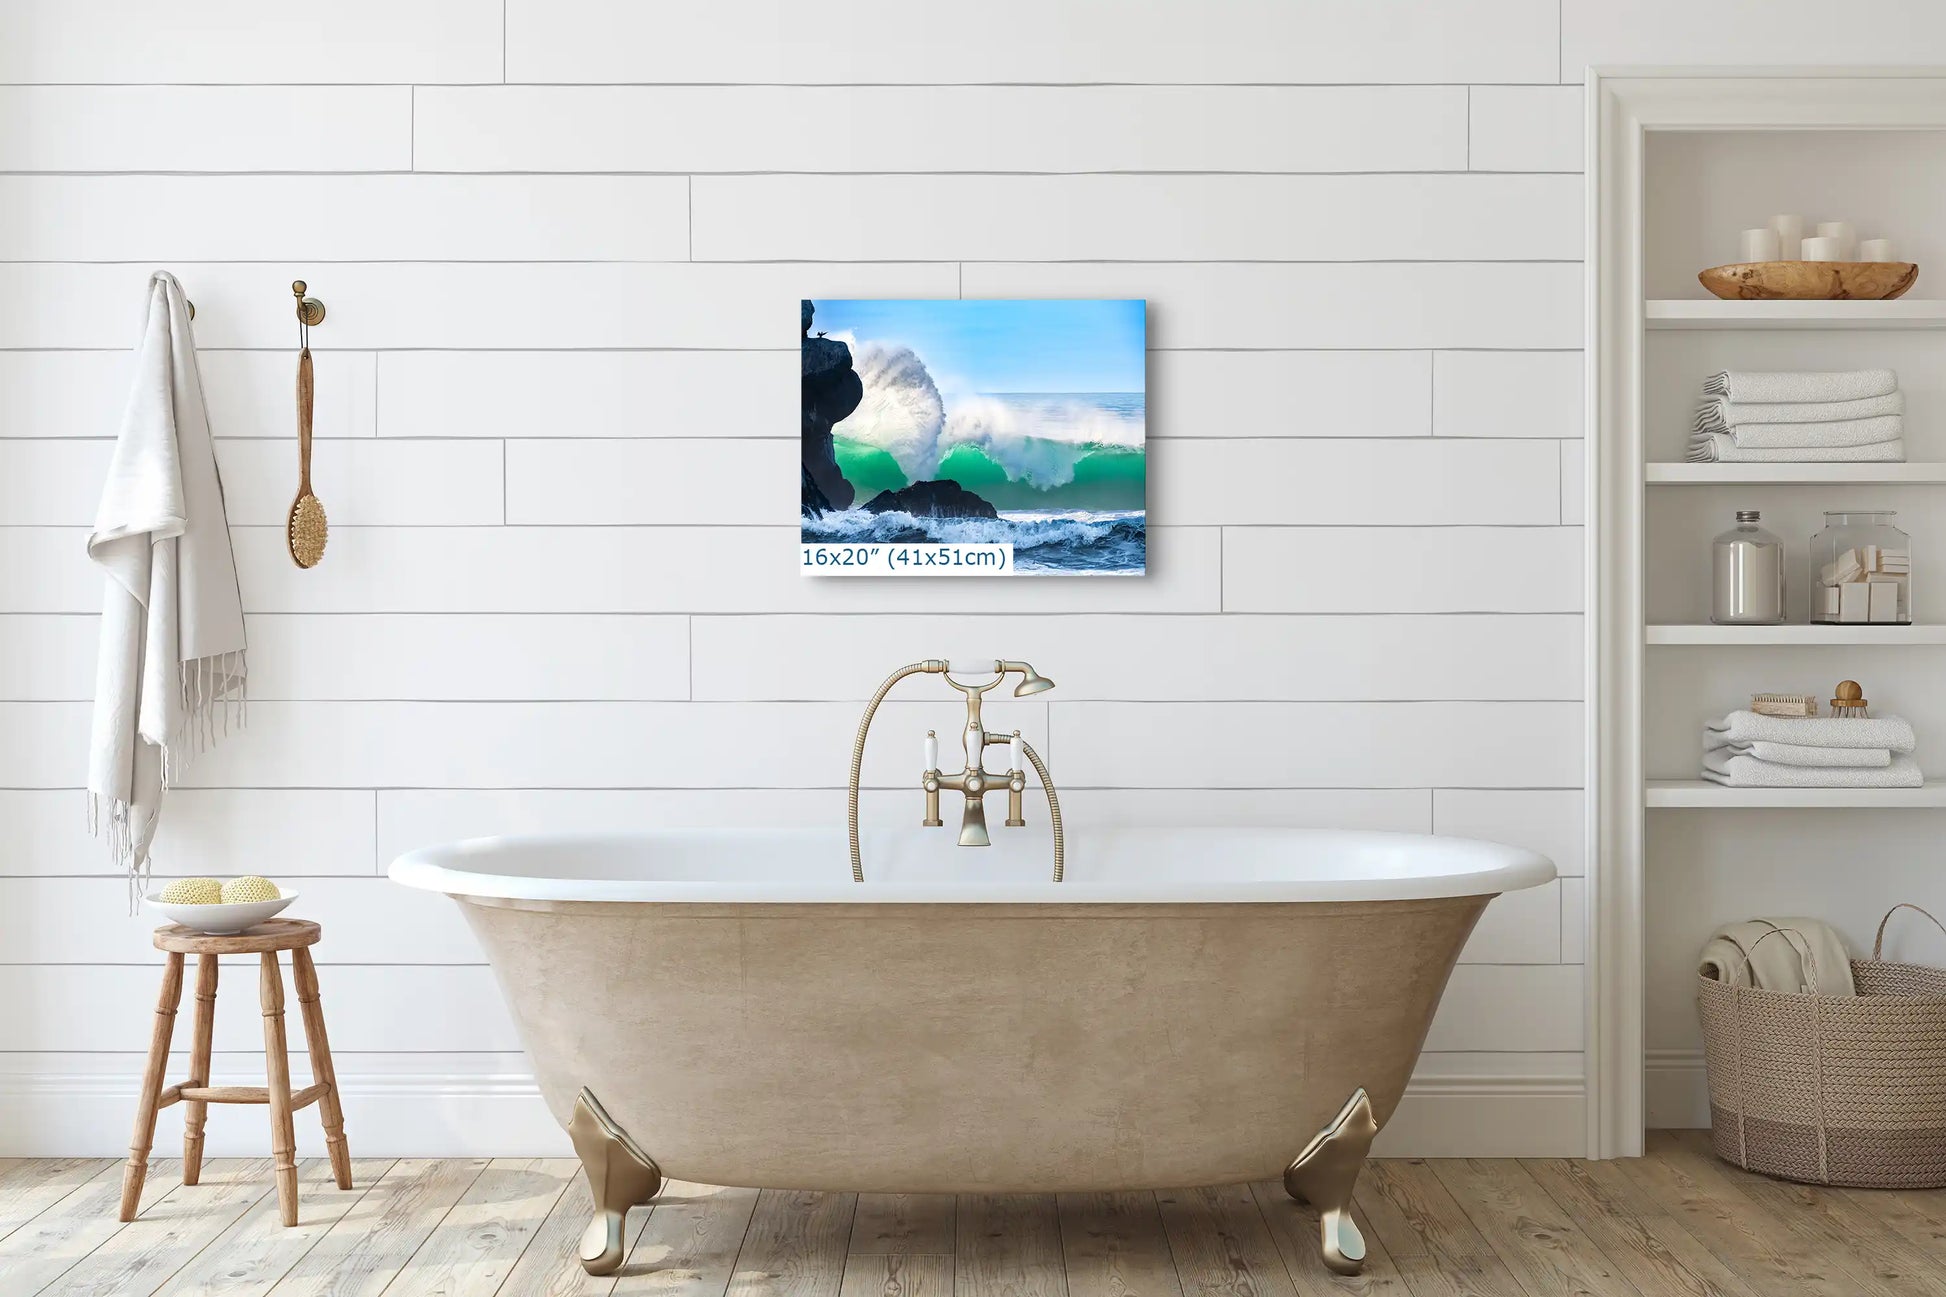 A 16"x20" print of a cresting wave near Morro Rock, hanging above a vintage bathtub, complementing the bathroom's tranquility.